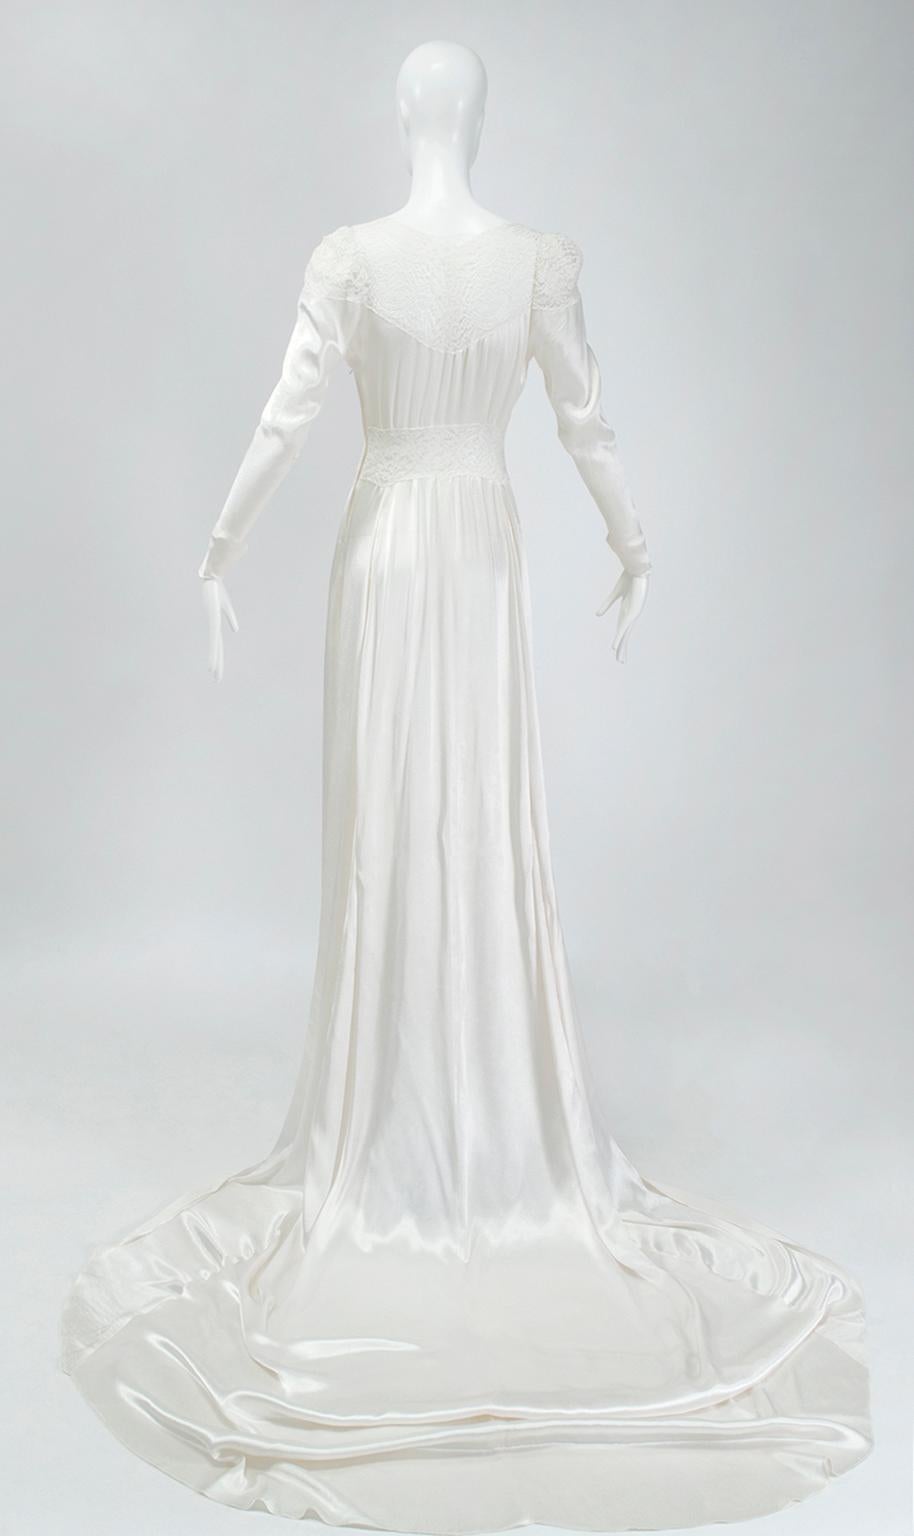 Nearly Naked White Satin Deco Wedding Gown w Transparent Lace Panels - XS, 1930s In Good Condition For Sale In Tucson, AZ